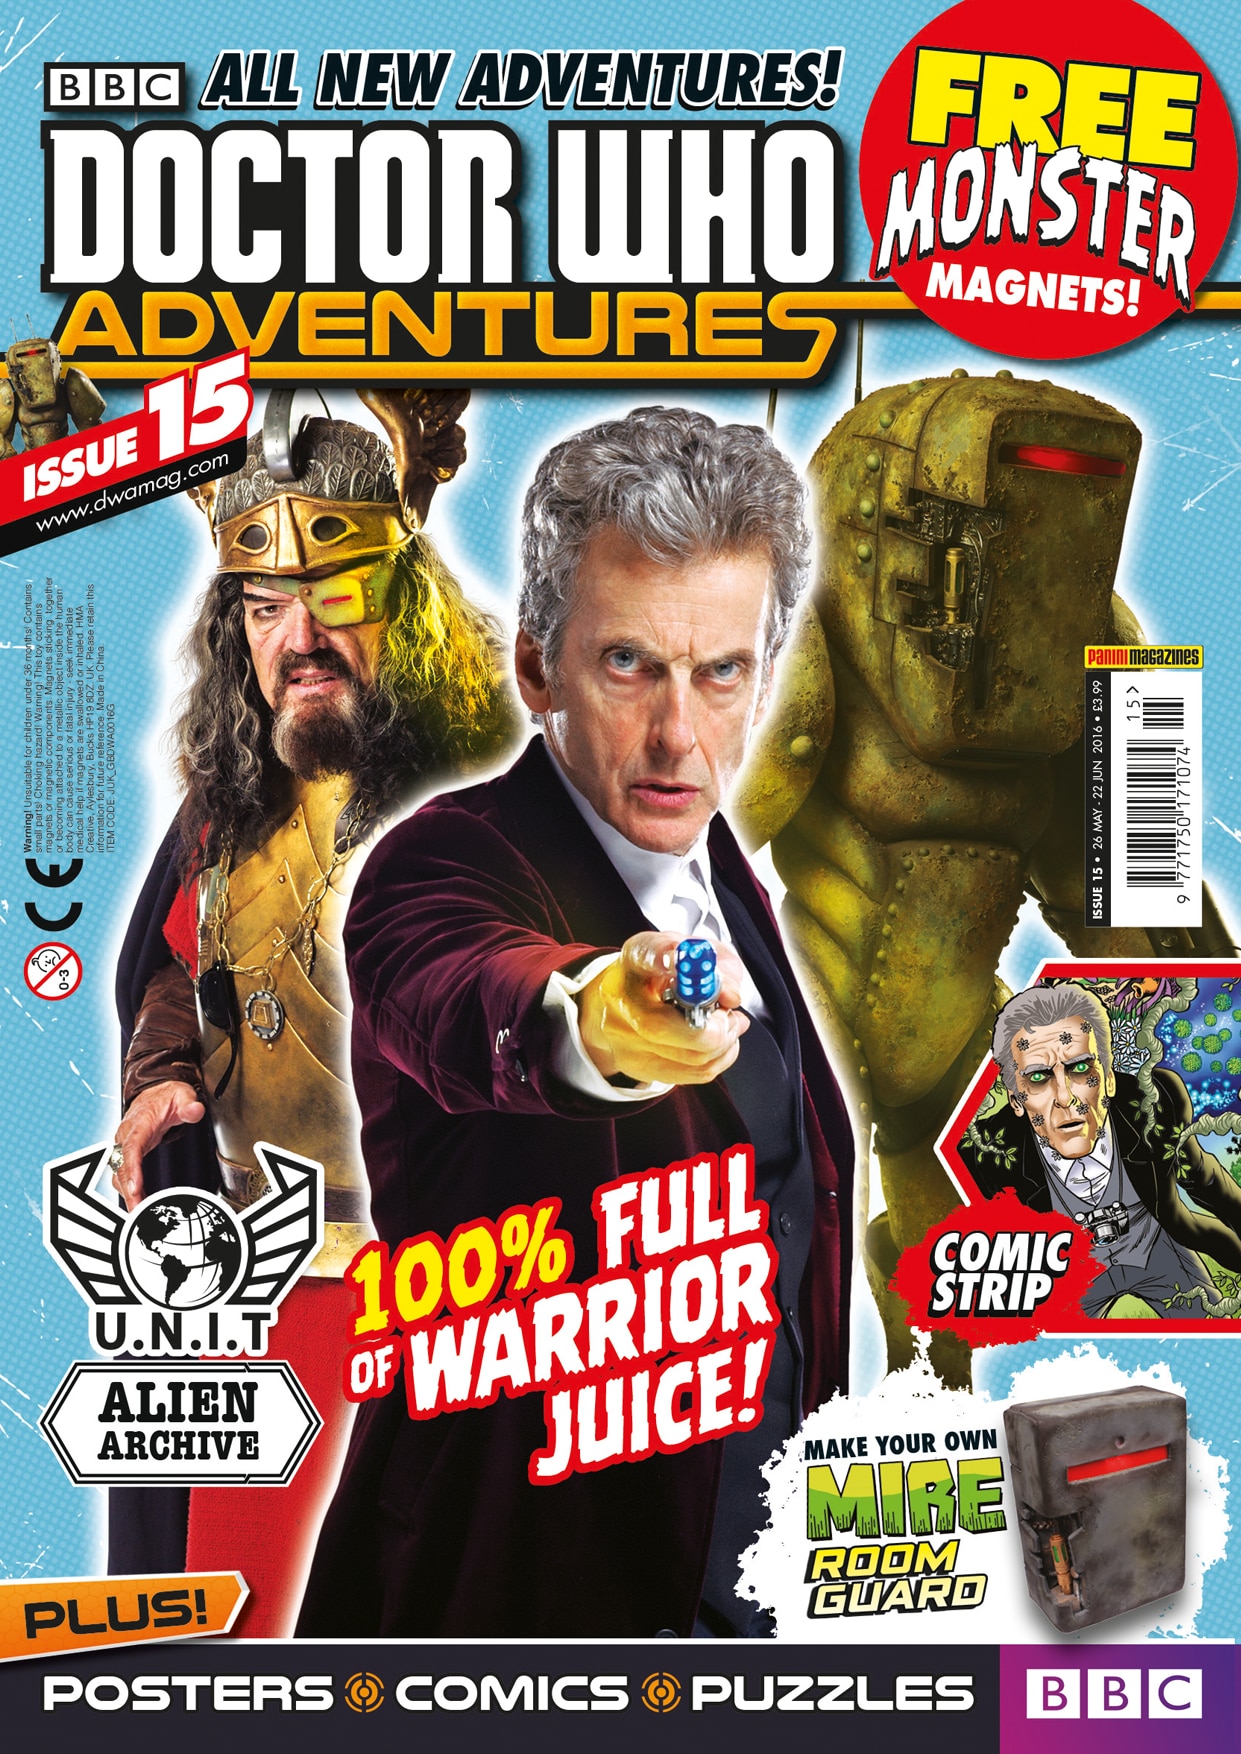 Doctor Who Adventures cover featuring Peter Capaldi